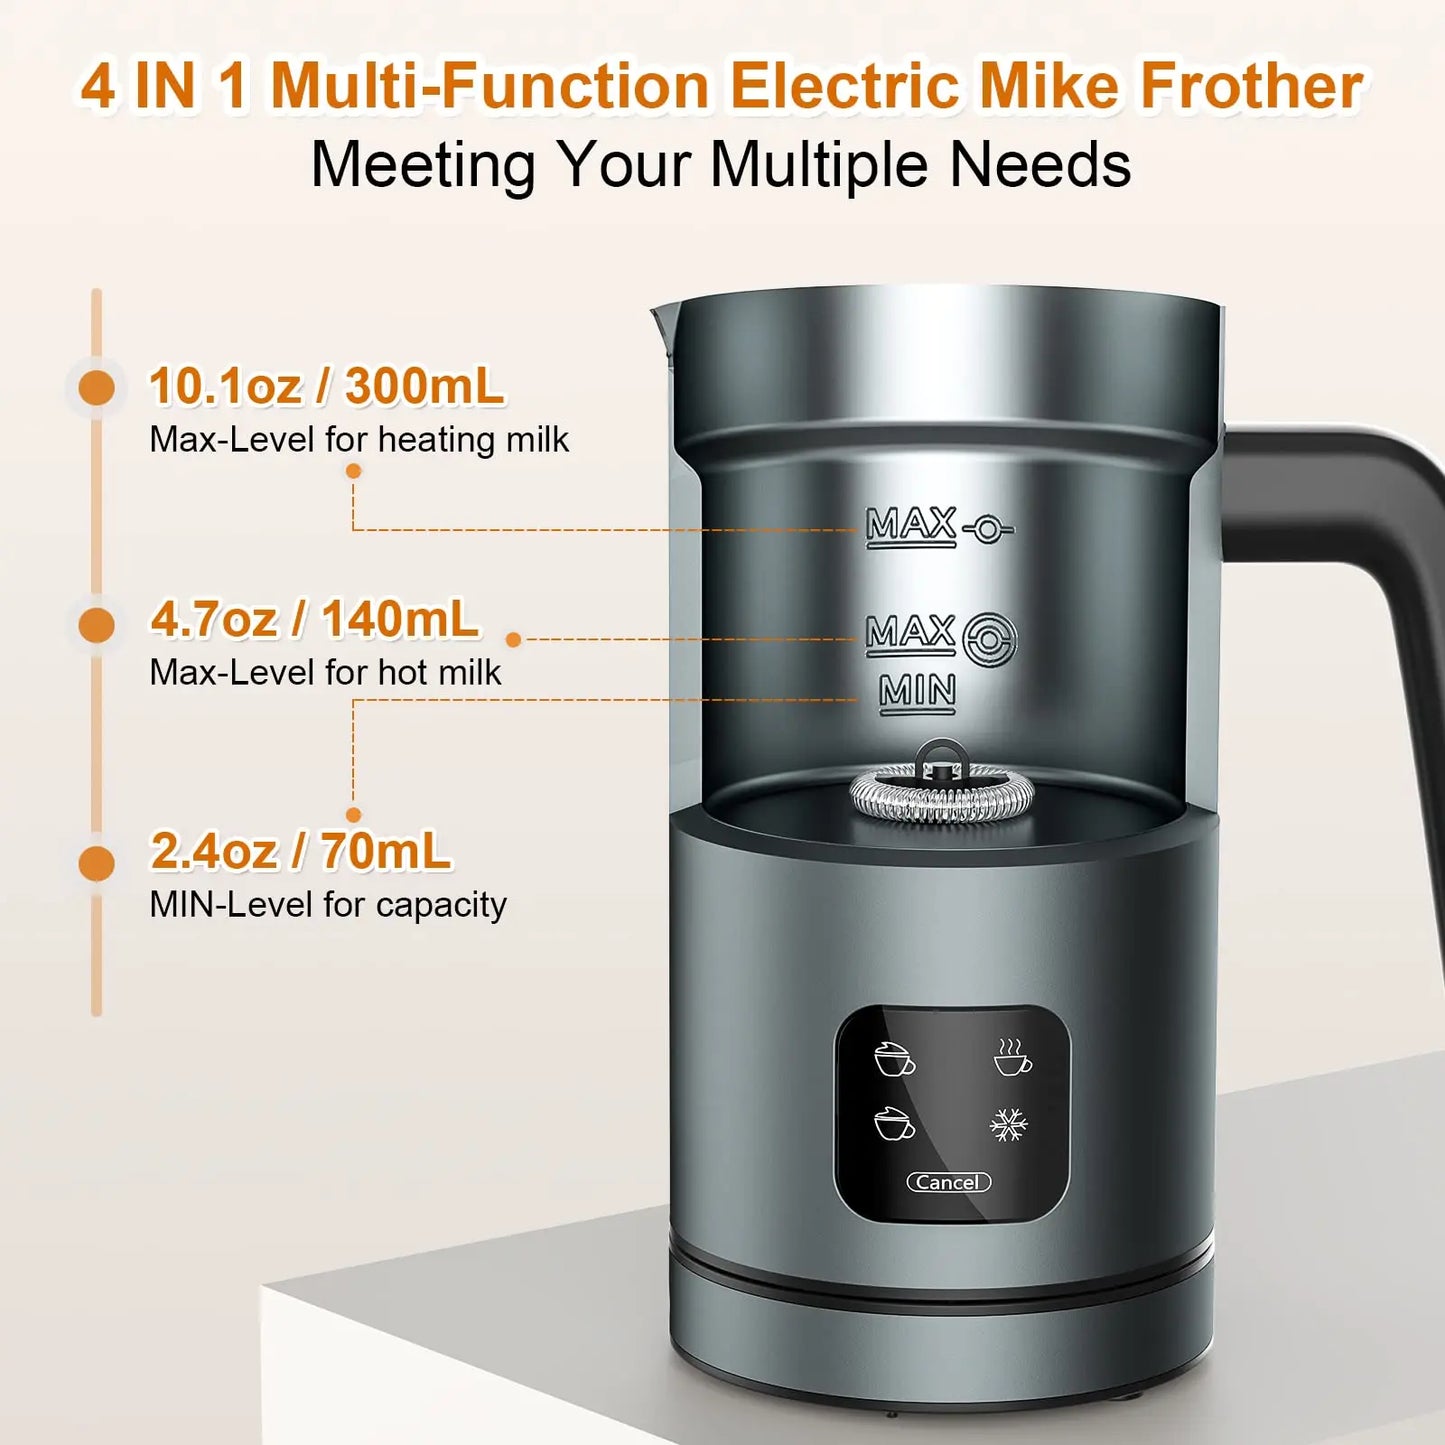 Frother for Coffee, Milk Frother, 4 IN 1 Automatic Warm and Cold Milk Foamer, BIZEWO Stainless Steel Milk Steamer for Latte, Cappuccinos, Macchiato, Hot Chocolate Milk with LED Touch Screen Panel BIZEWO